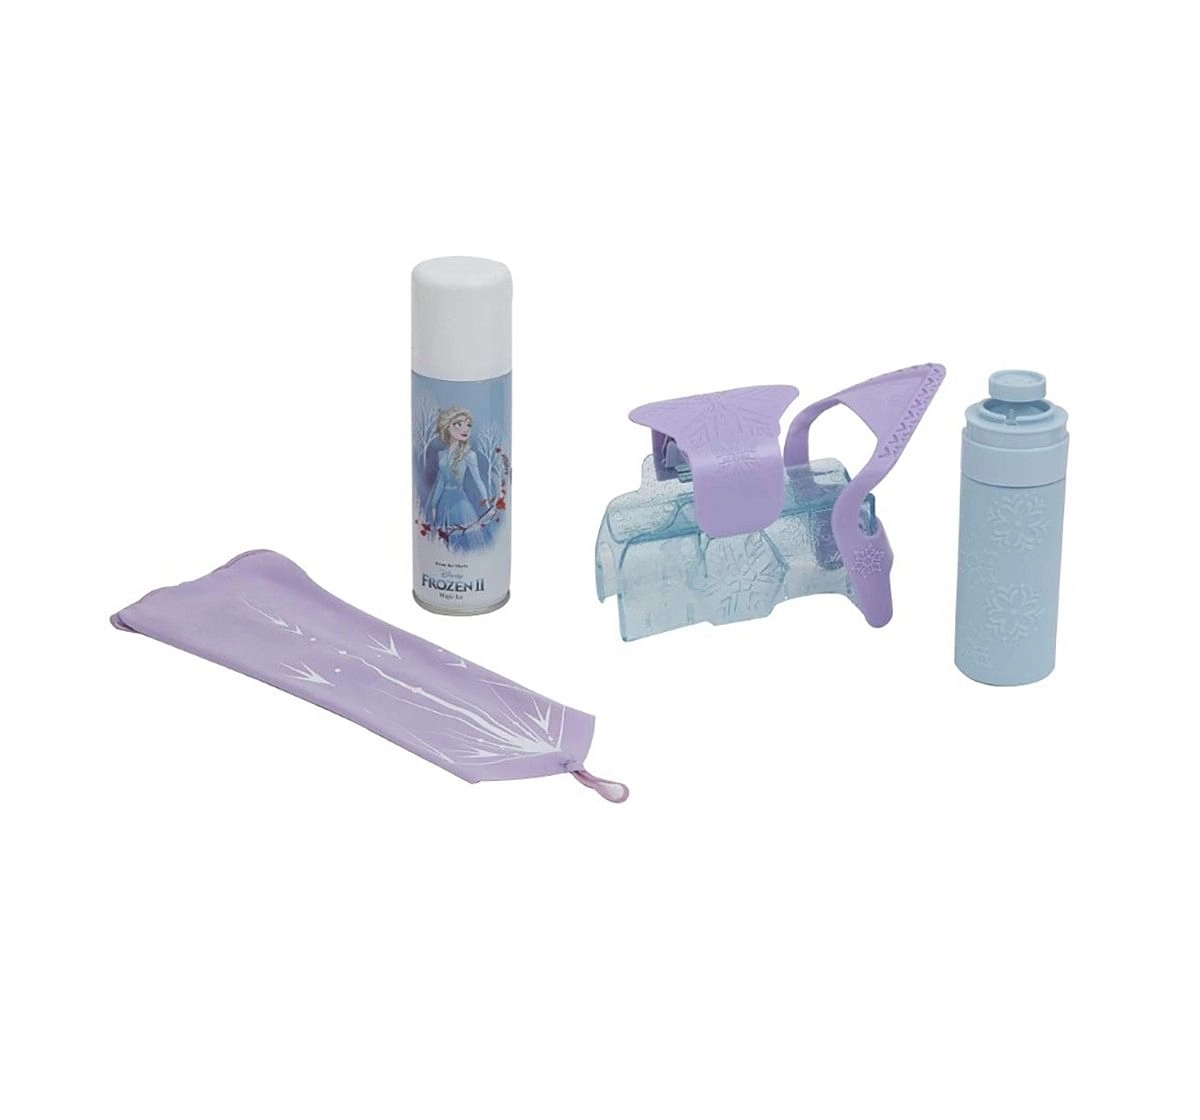 Disney Frozen2 New Magic Ice Sleeve Dolls & Accessories for age 5Y+ 